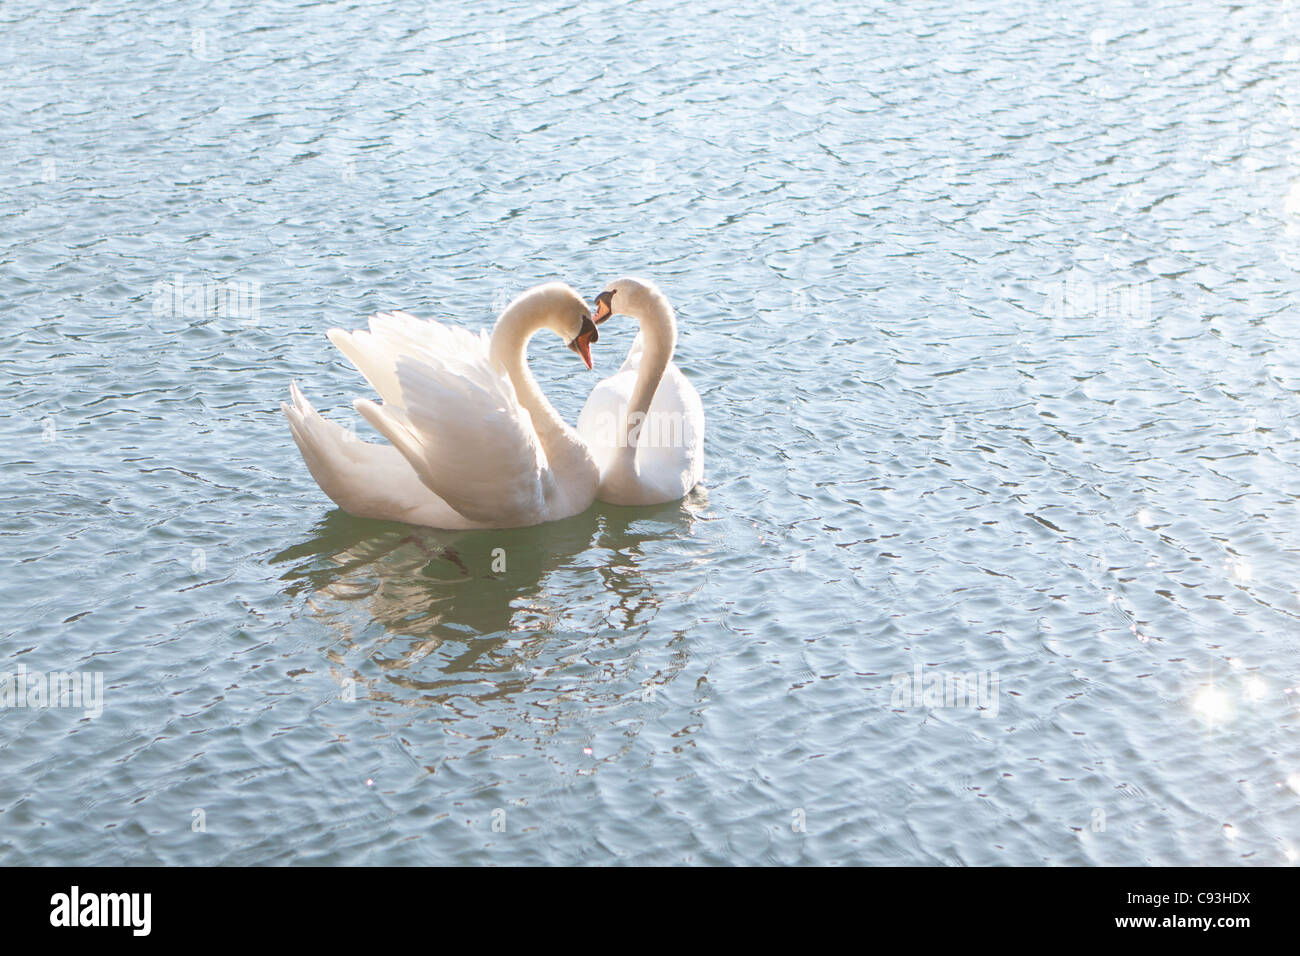 Two swans form a heart shape with their necks. Stock Photo